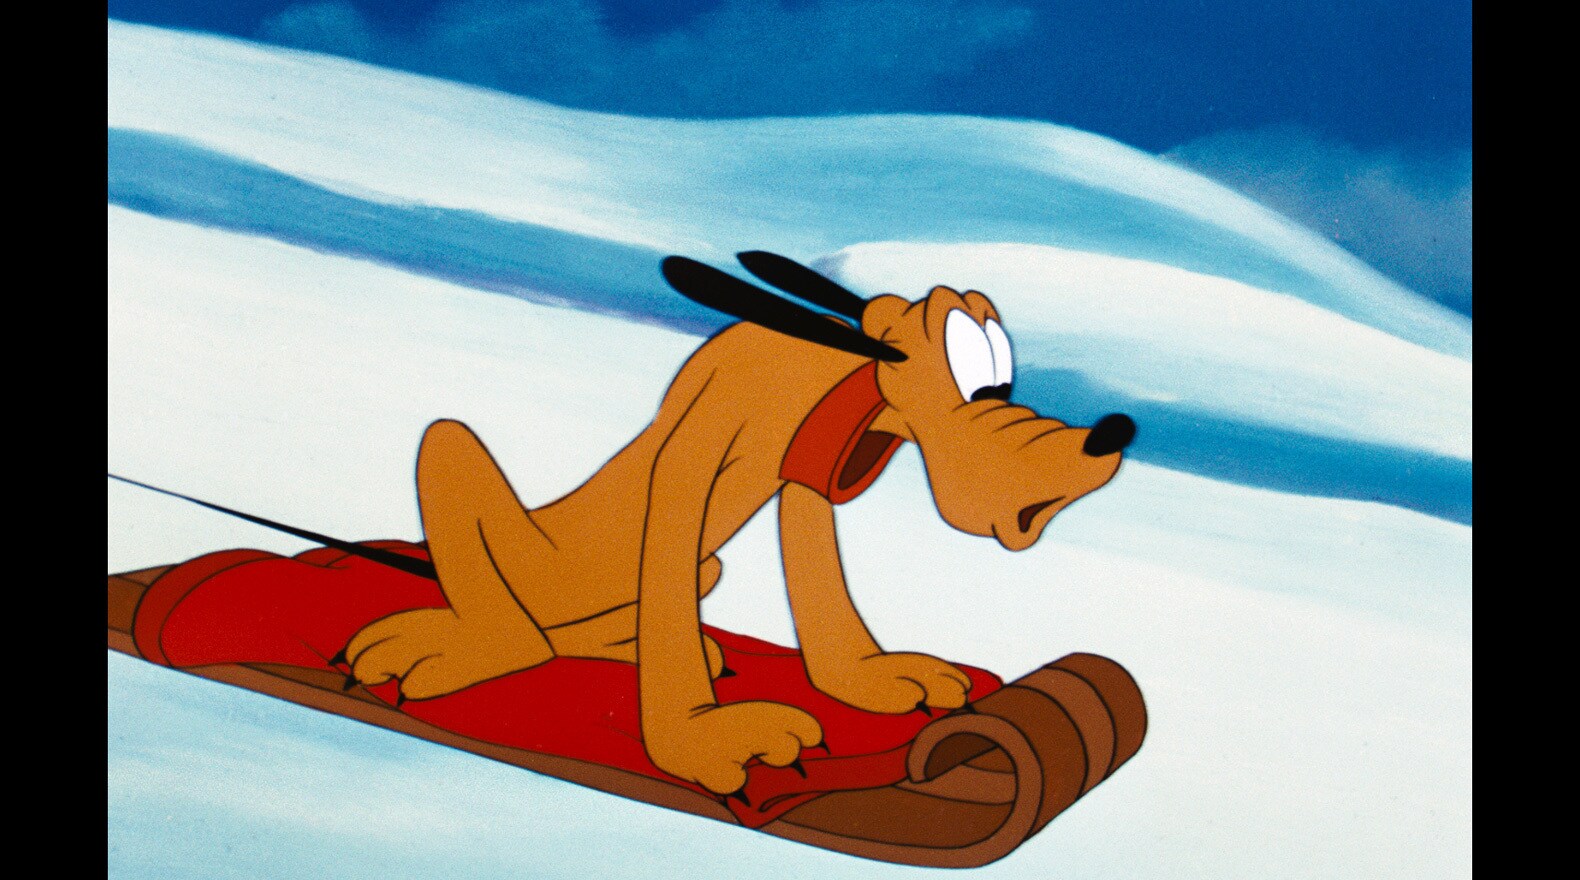 Pluto looks down the snow-covered mountain as he careens on a sleigh.